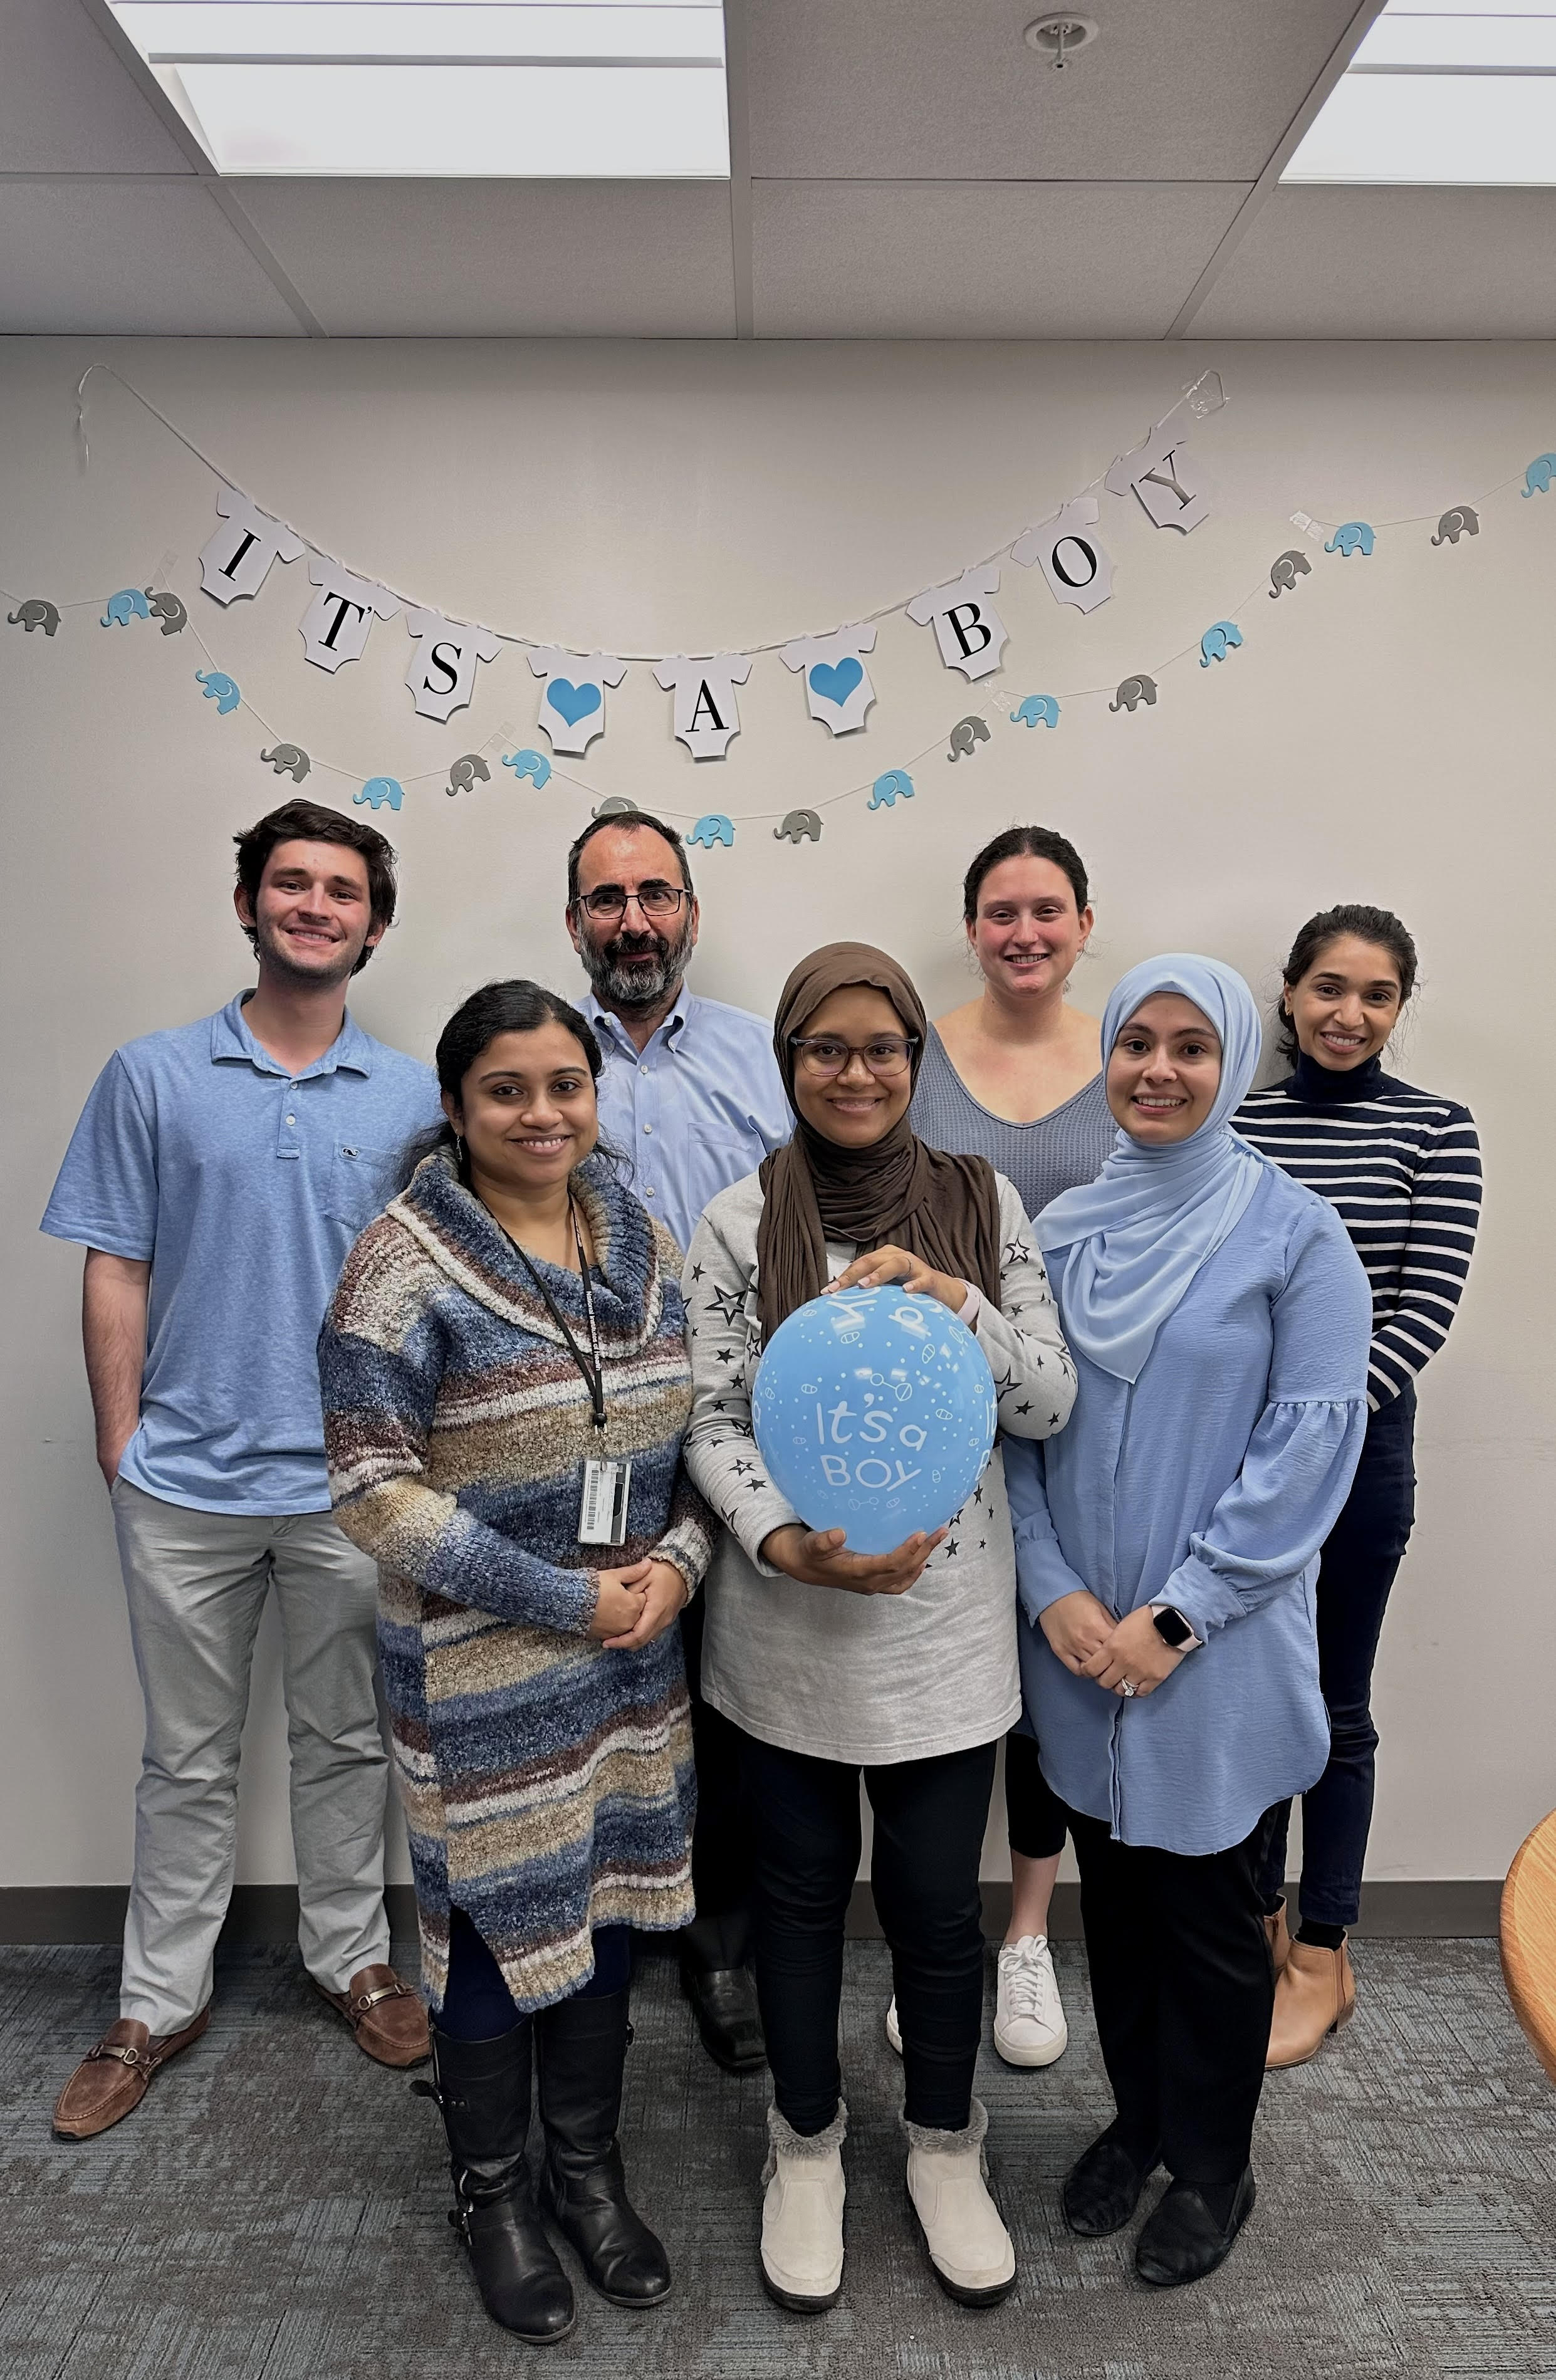 Lab Members in front of a banner that says "It's a Boy".  One member is holding a blue balloon.